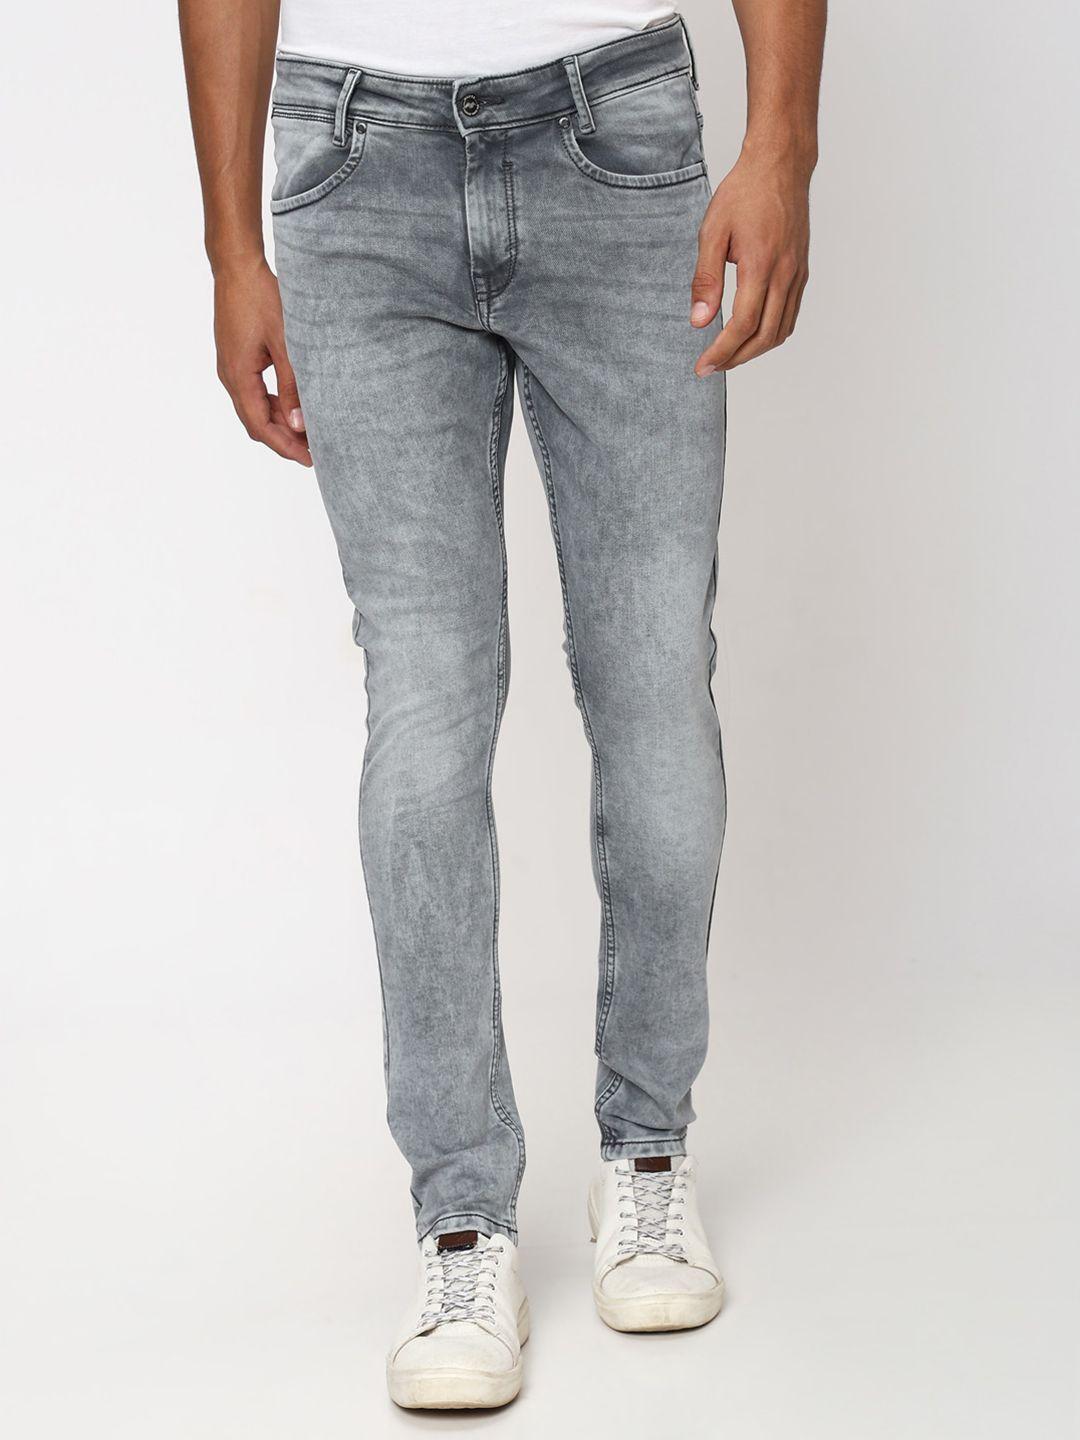 mufti-men-skinny-fit-heavy-fade-clean-look-stretchable-jeans